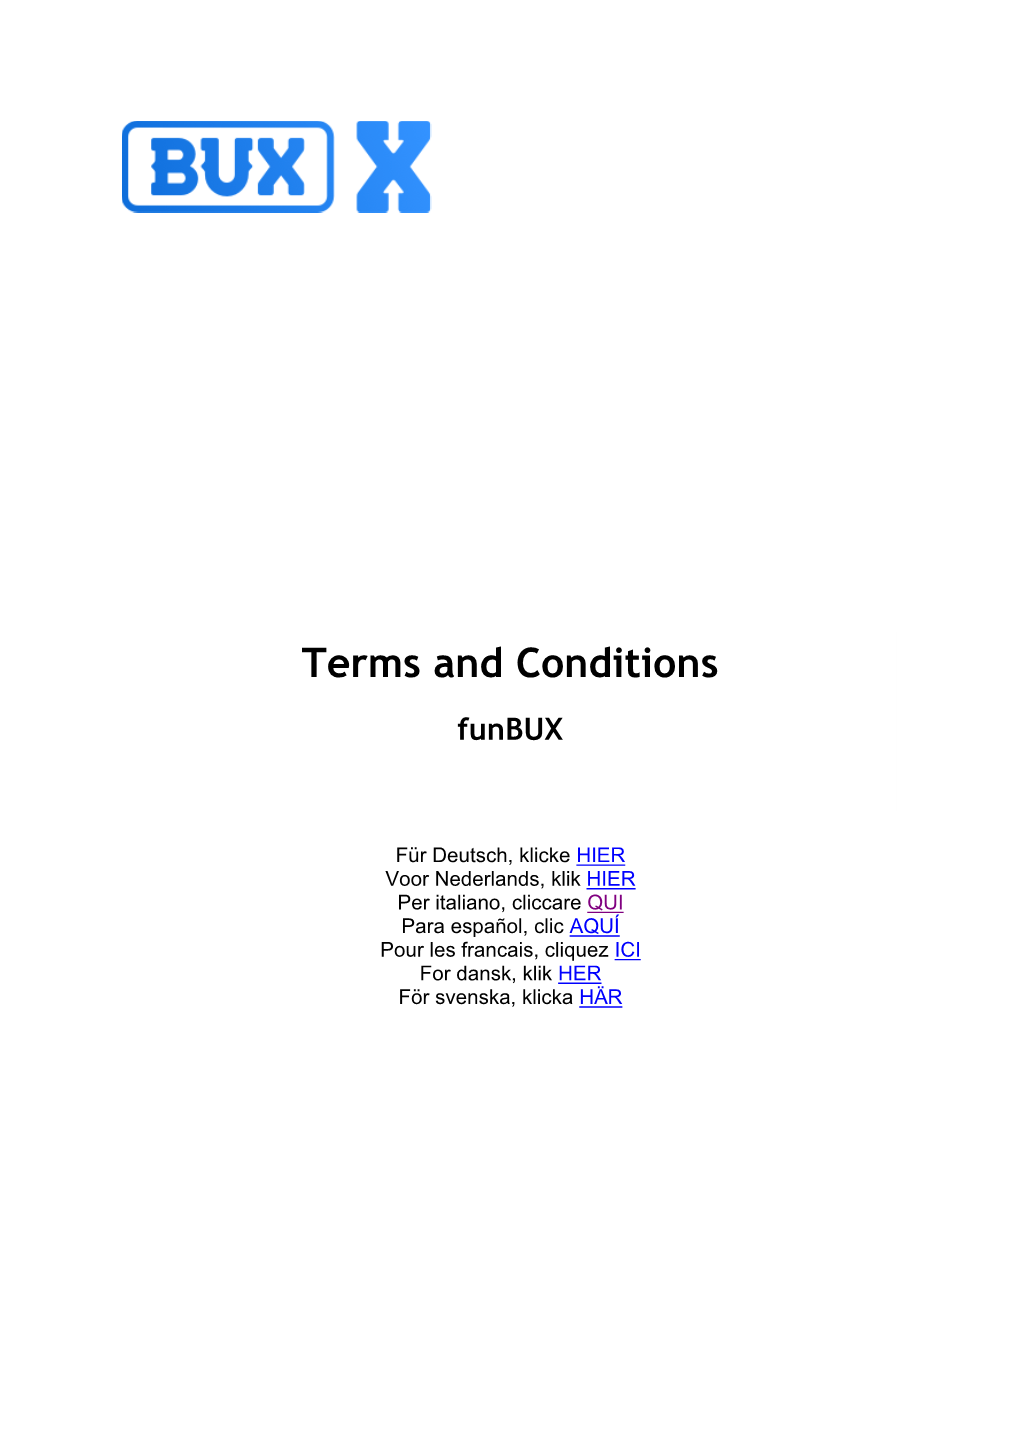 Terms and Conditions Funbux